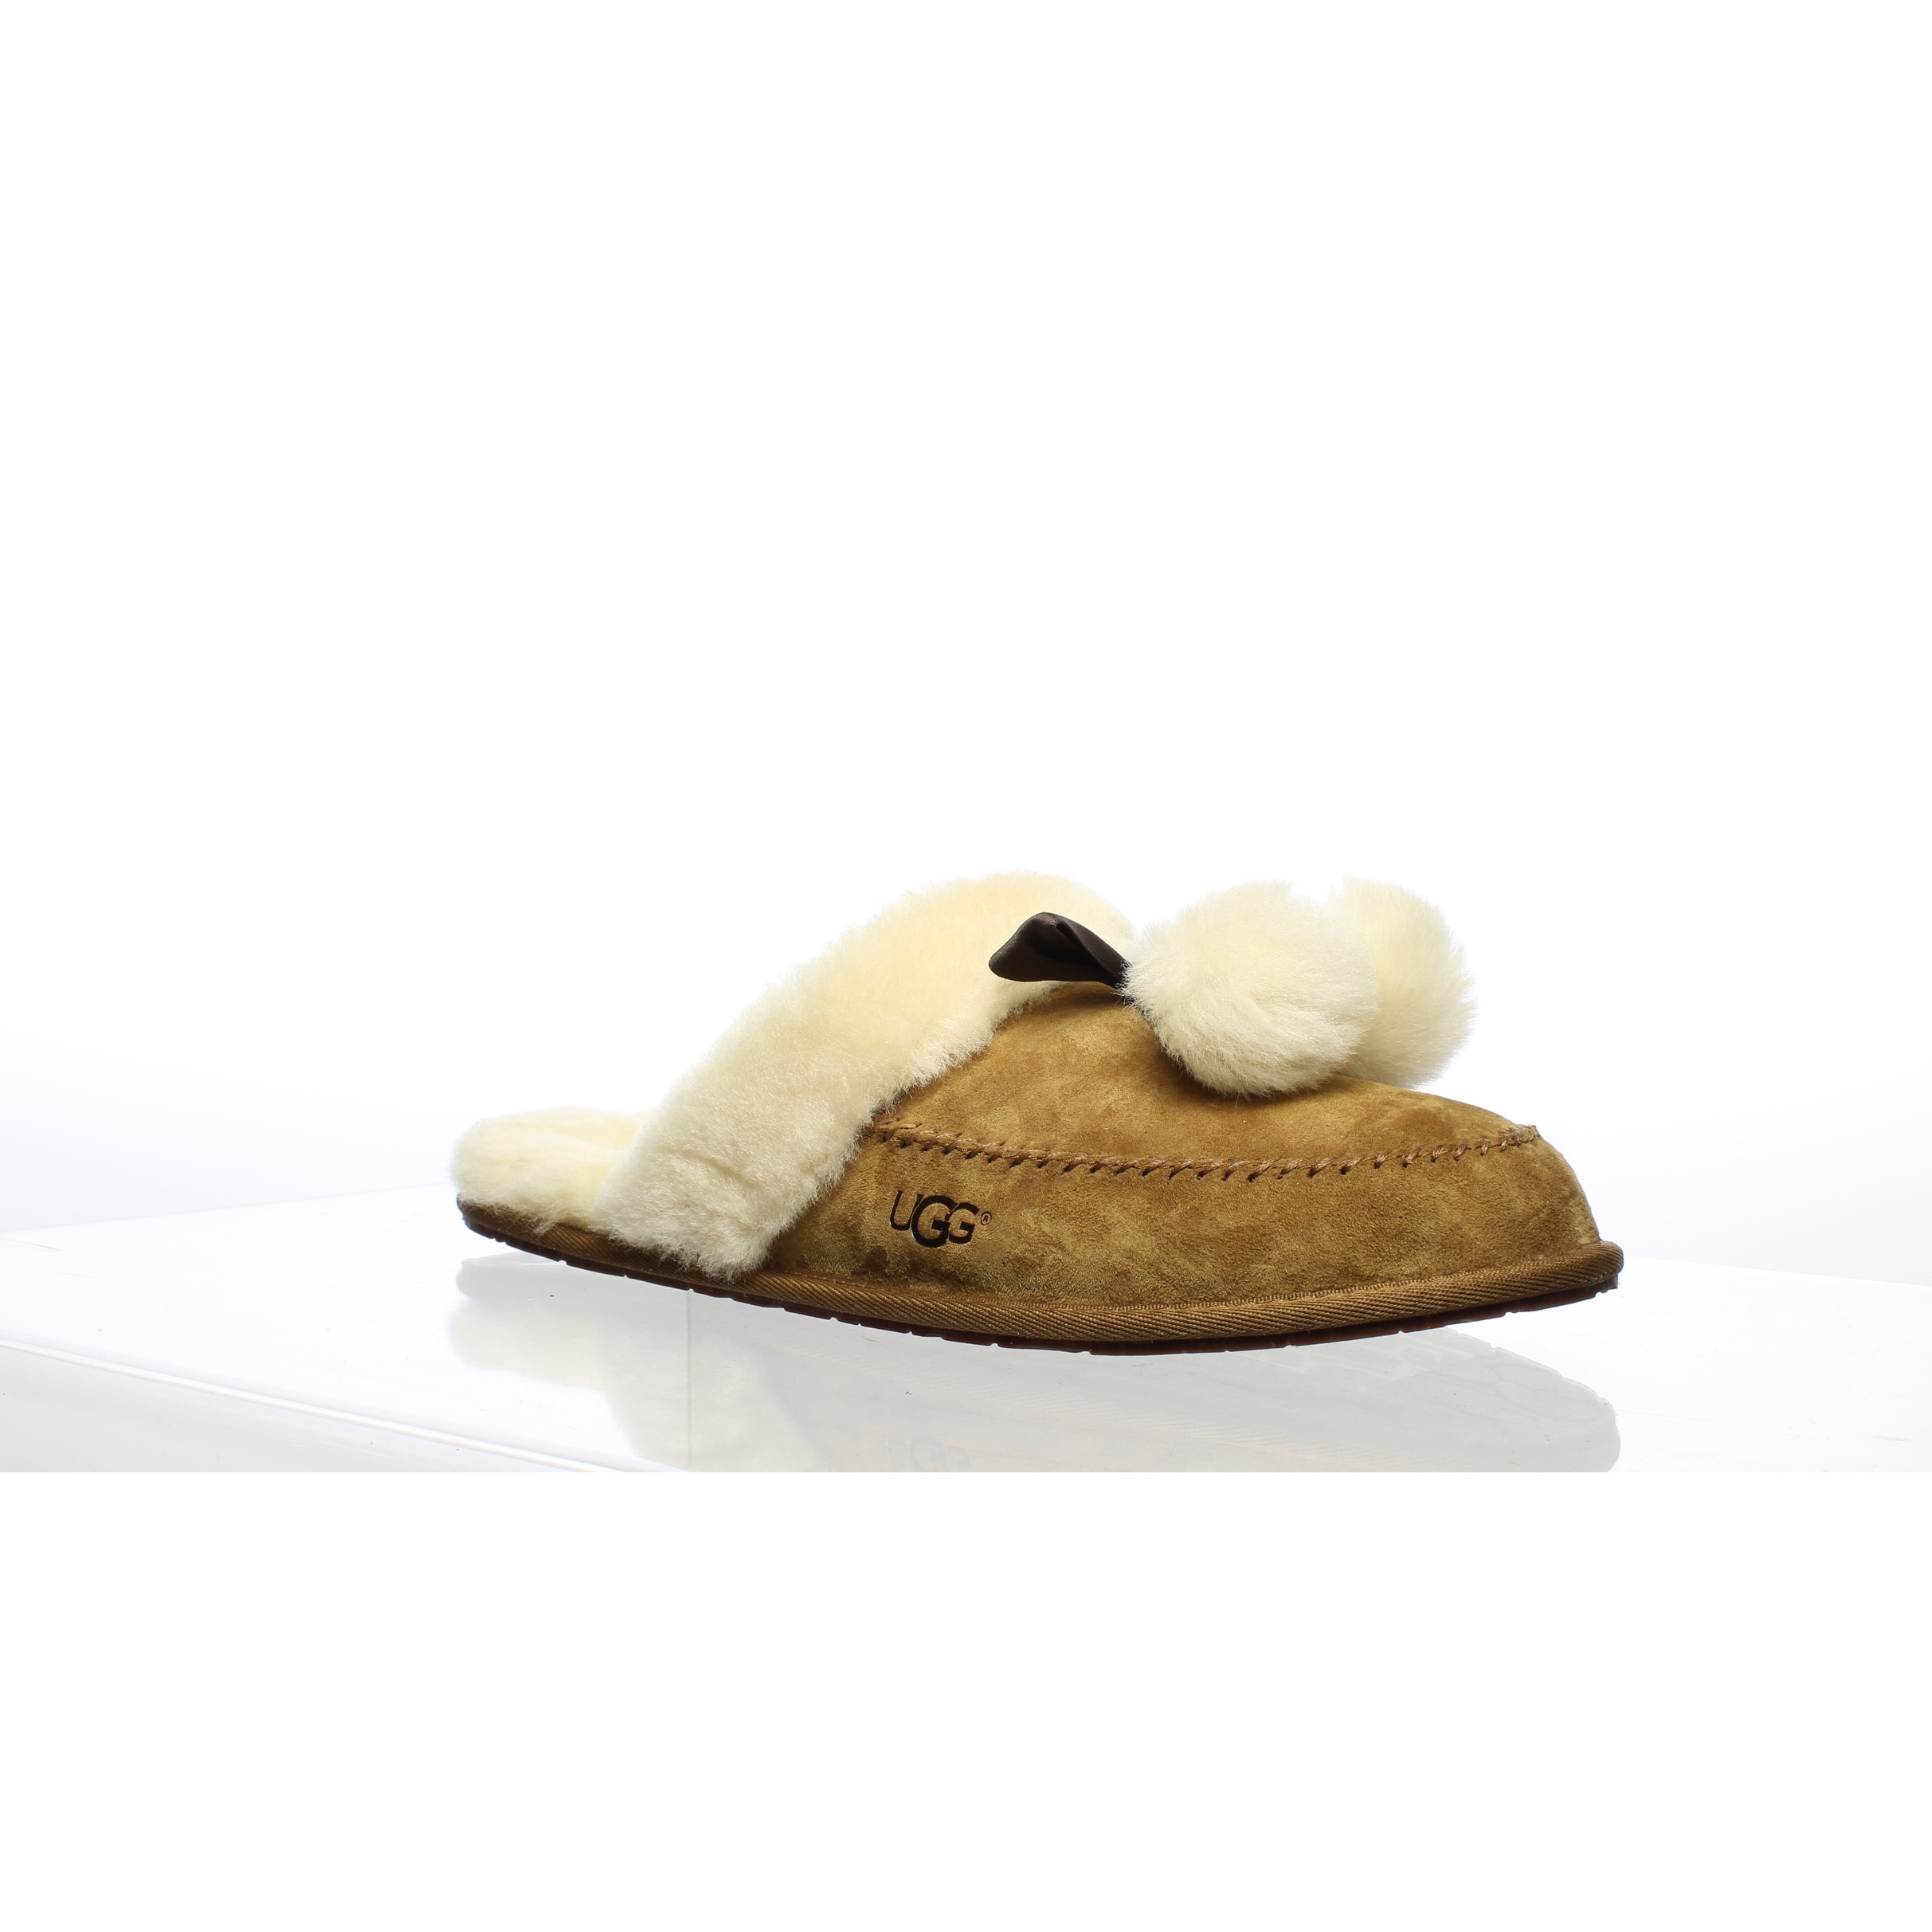 12 size slippers